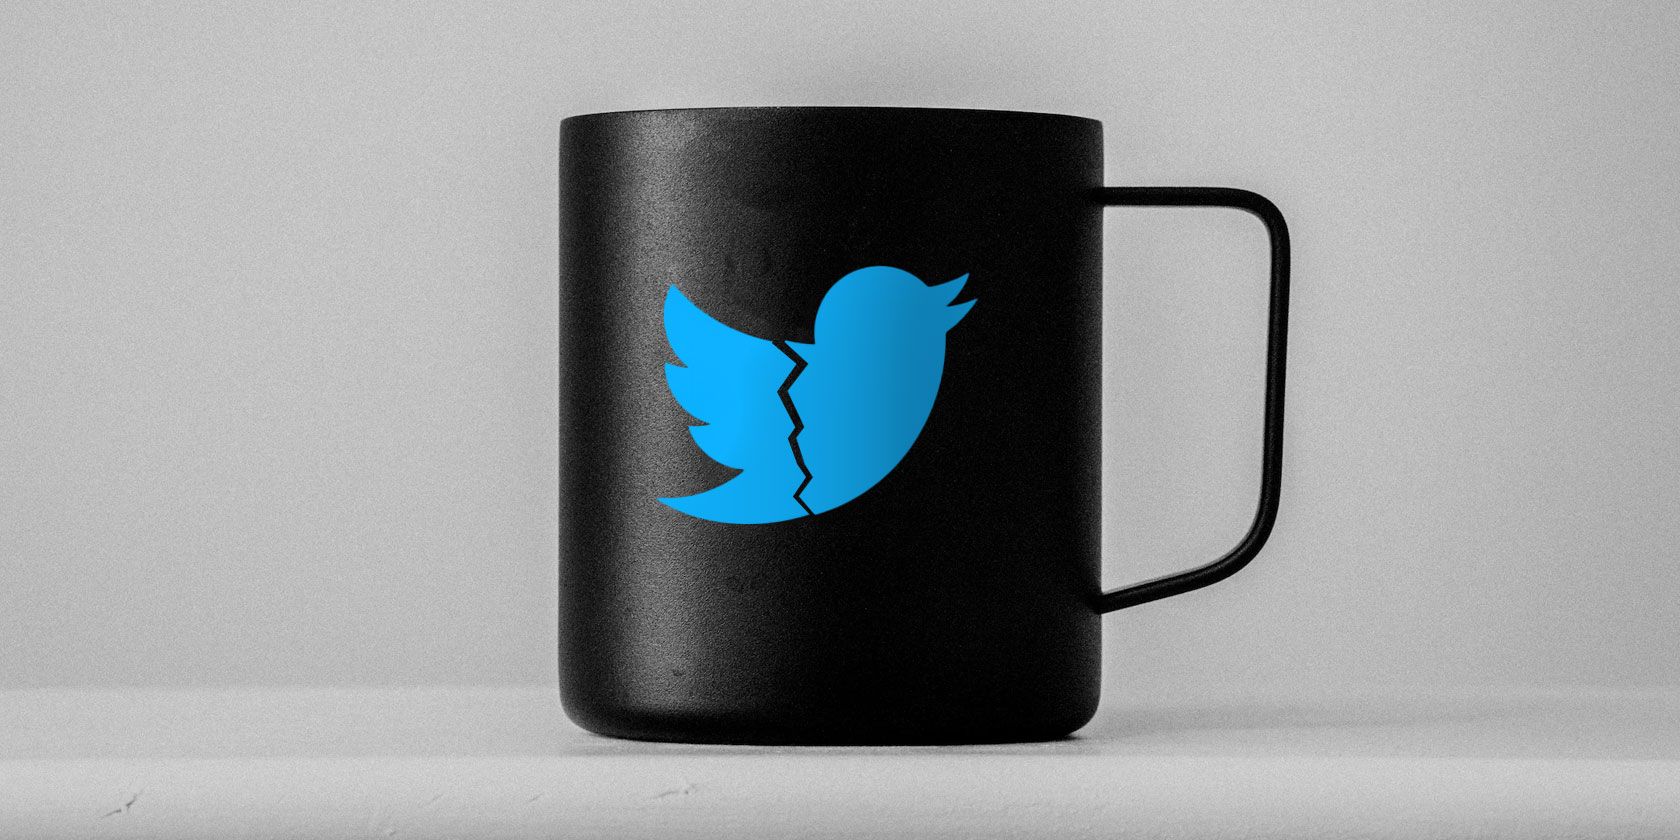 Twitter logo on a cup